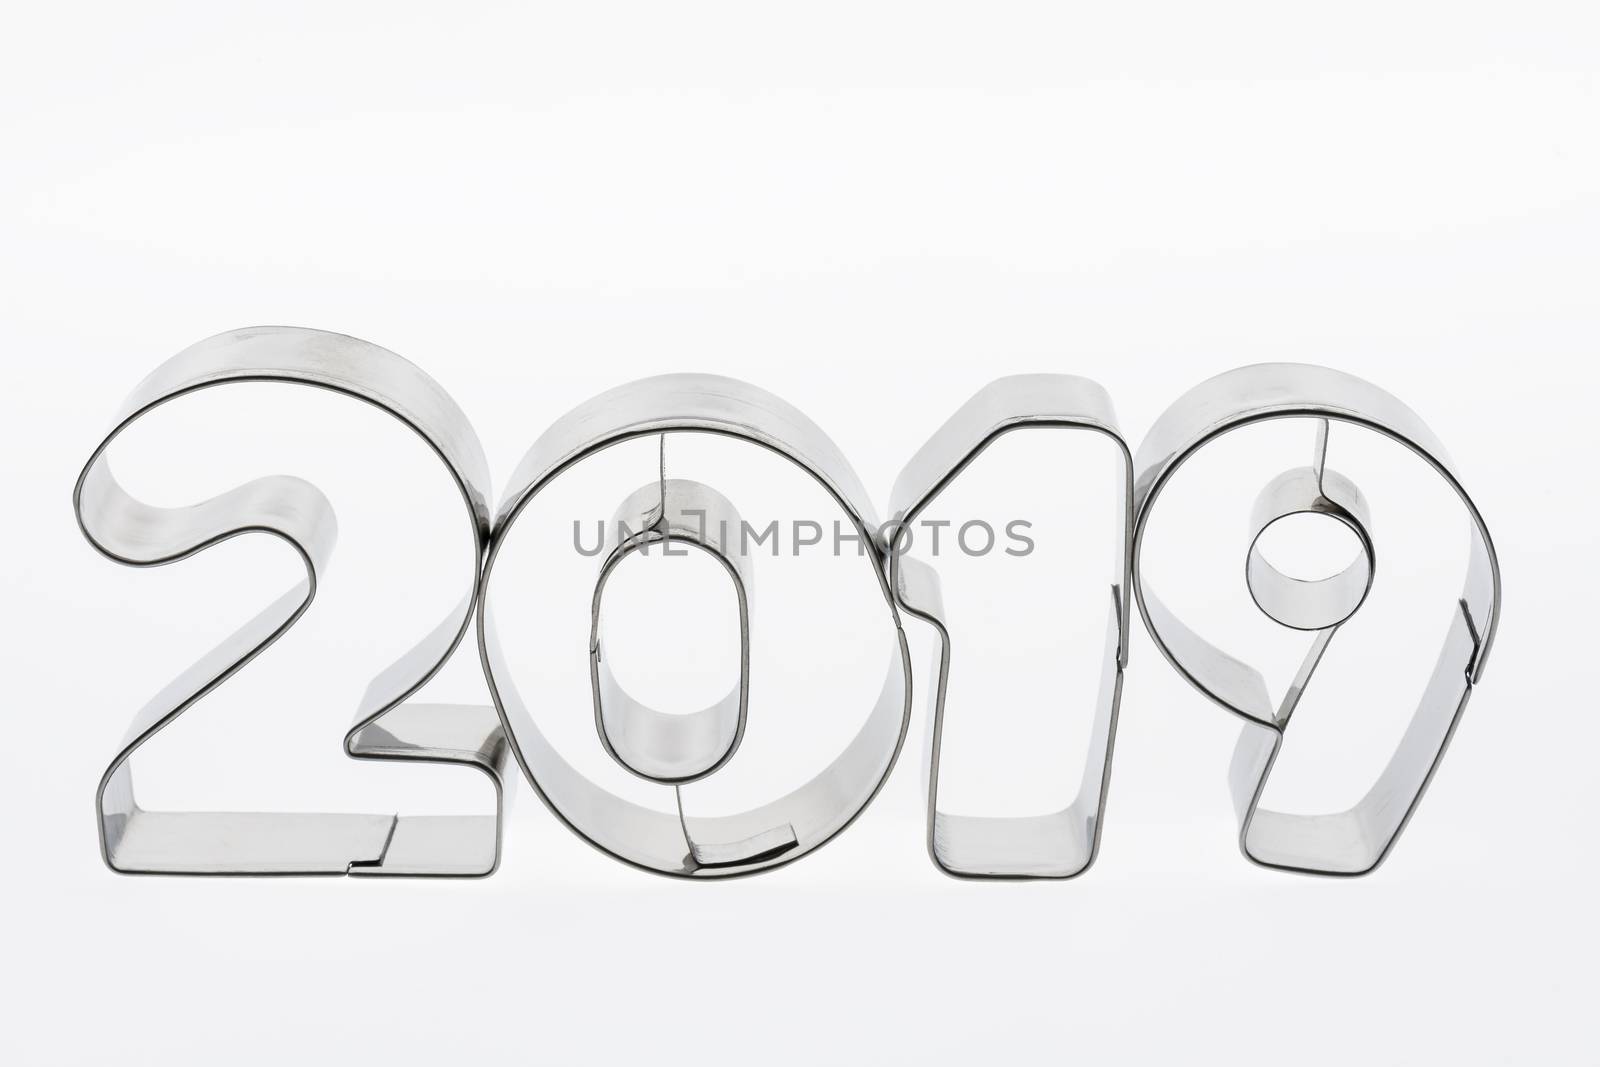 Text two thousand nineteen in metal put figures on a white background as a visualization of the coming new year
